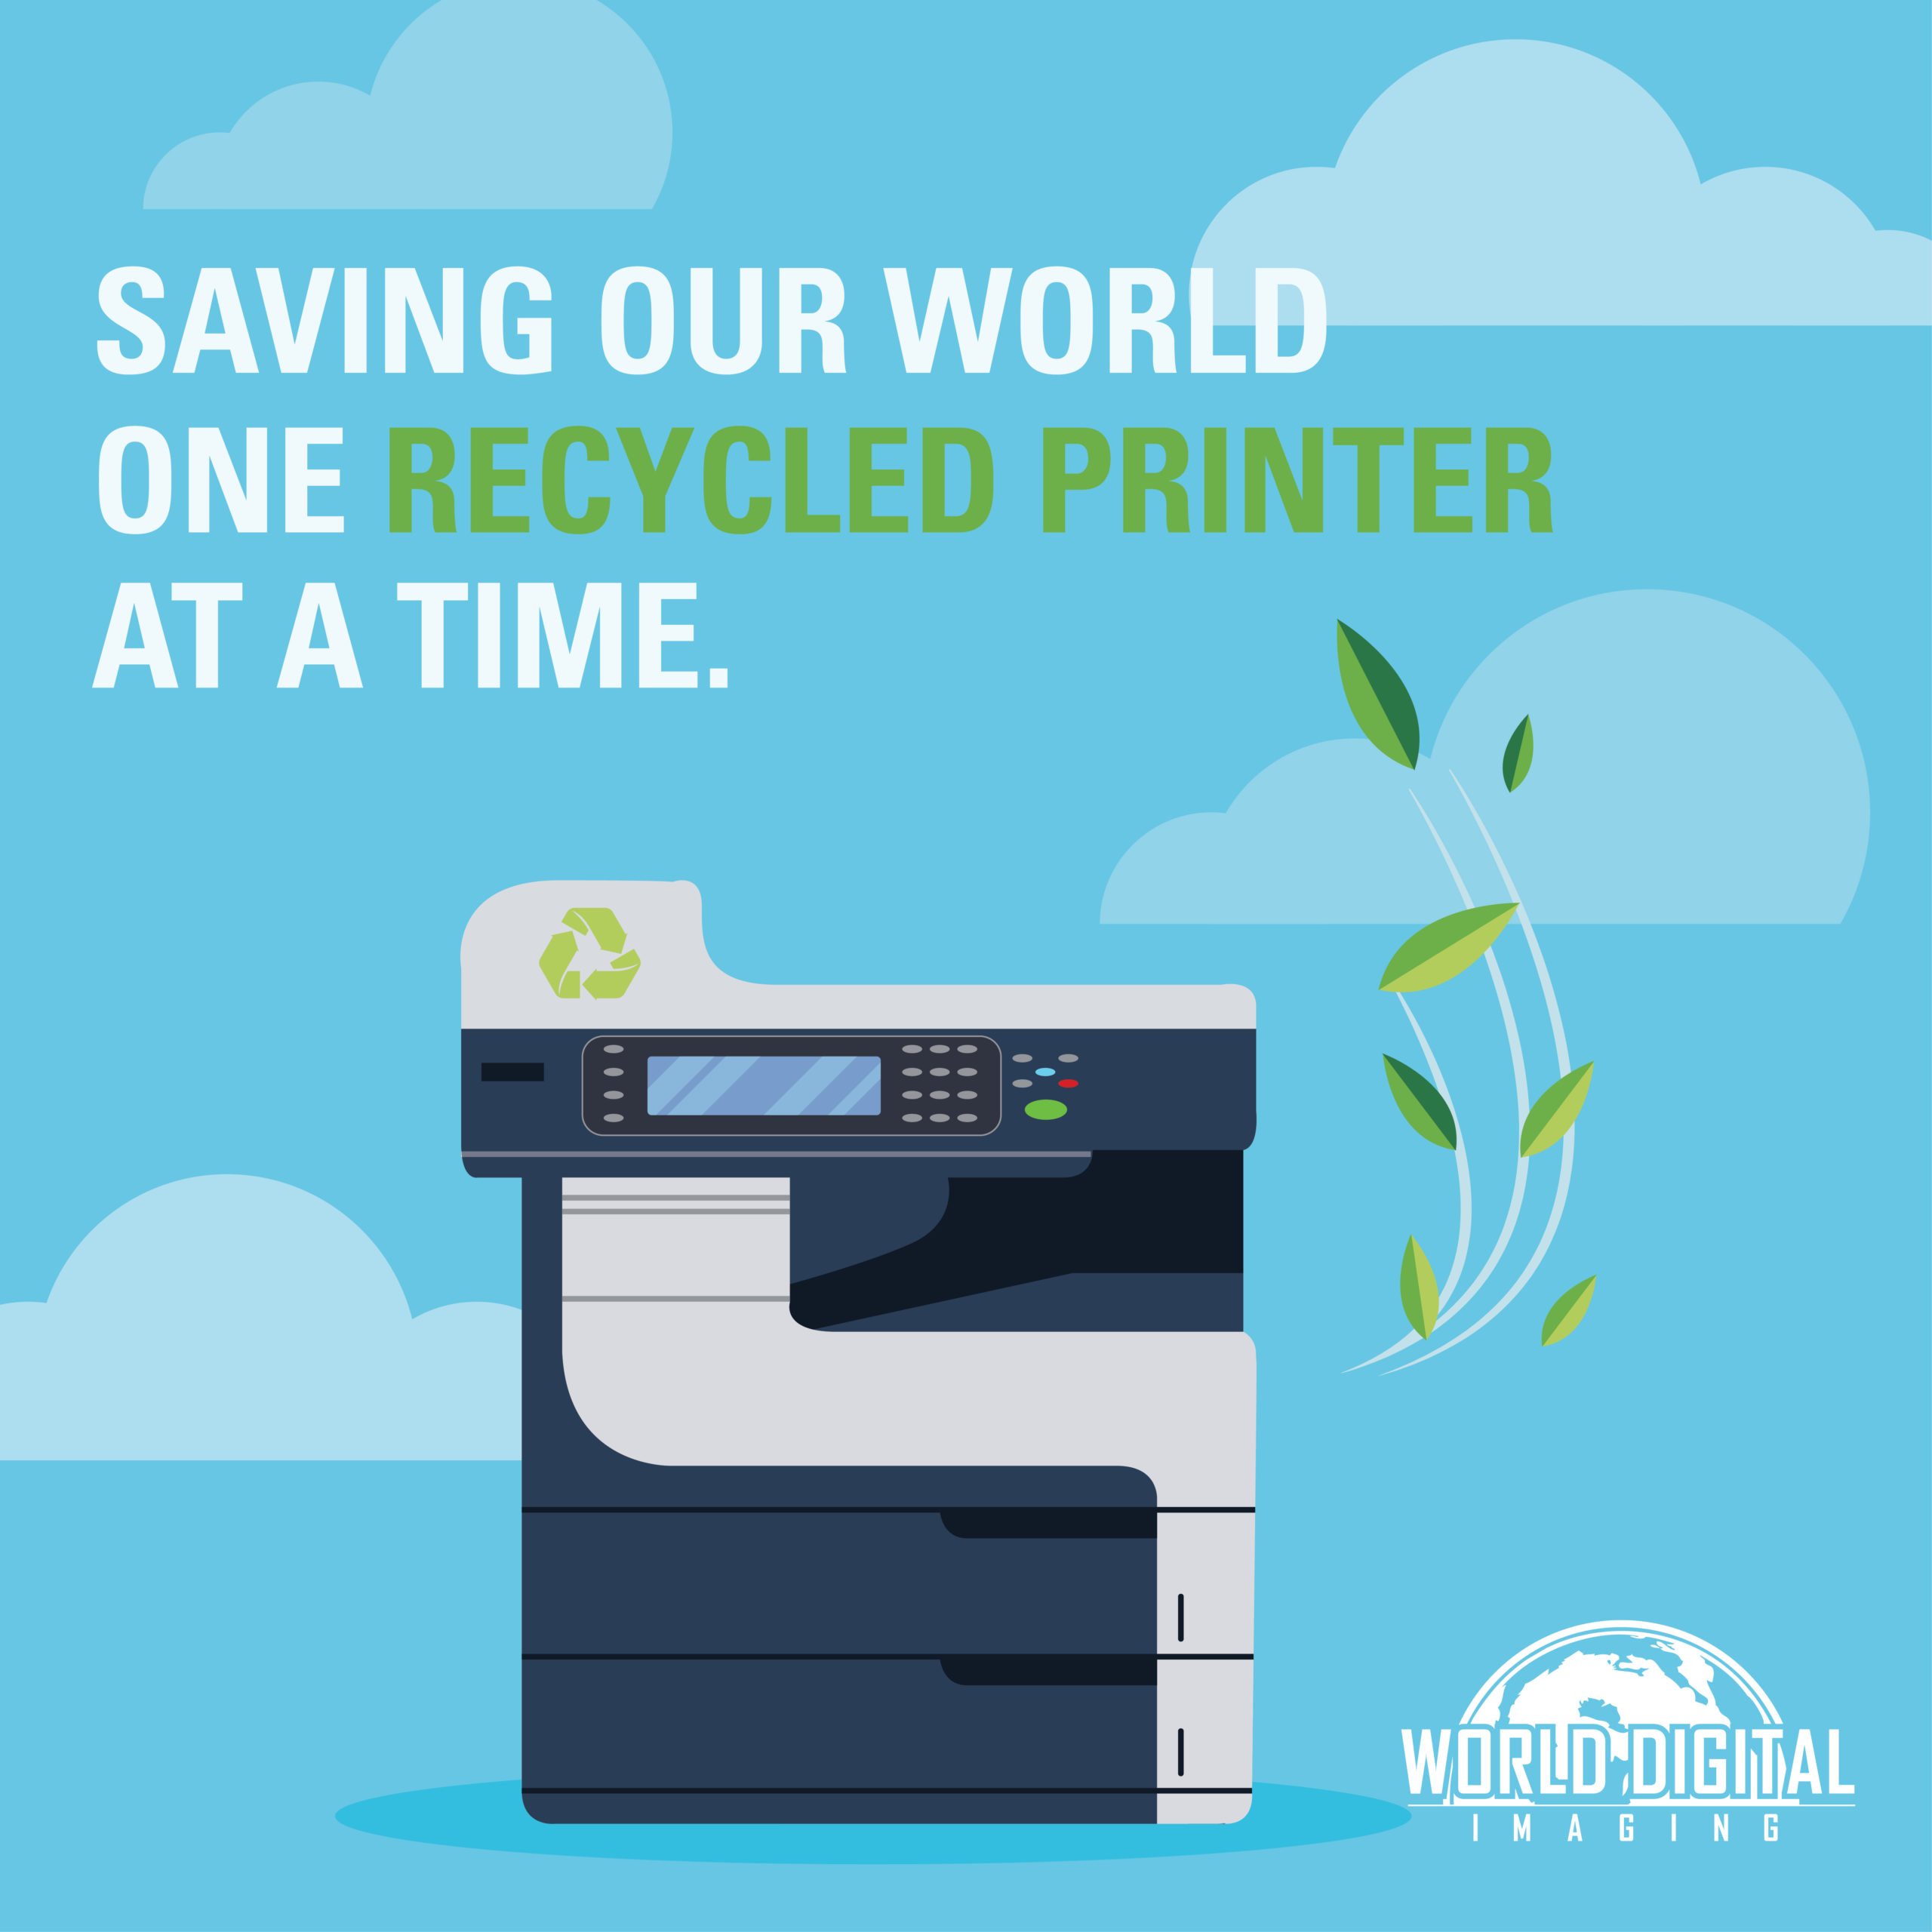 Saving Our World One Recycled Copier at a Time